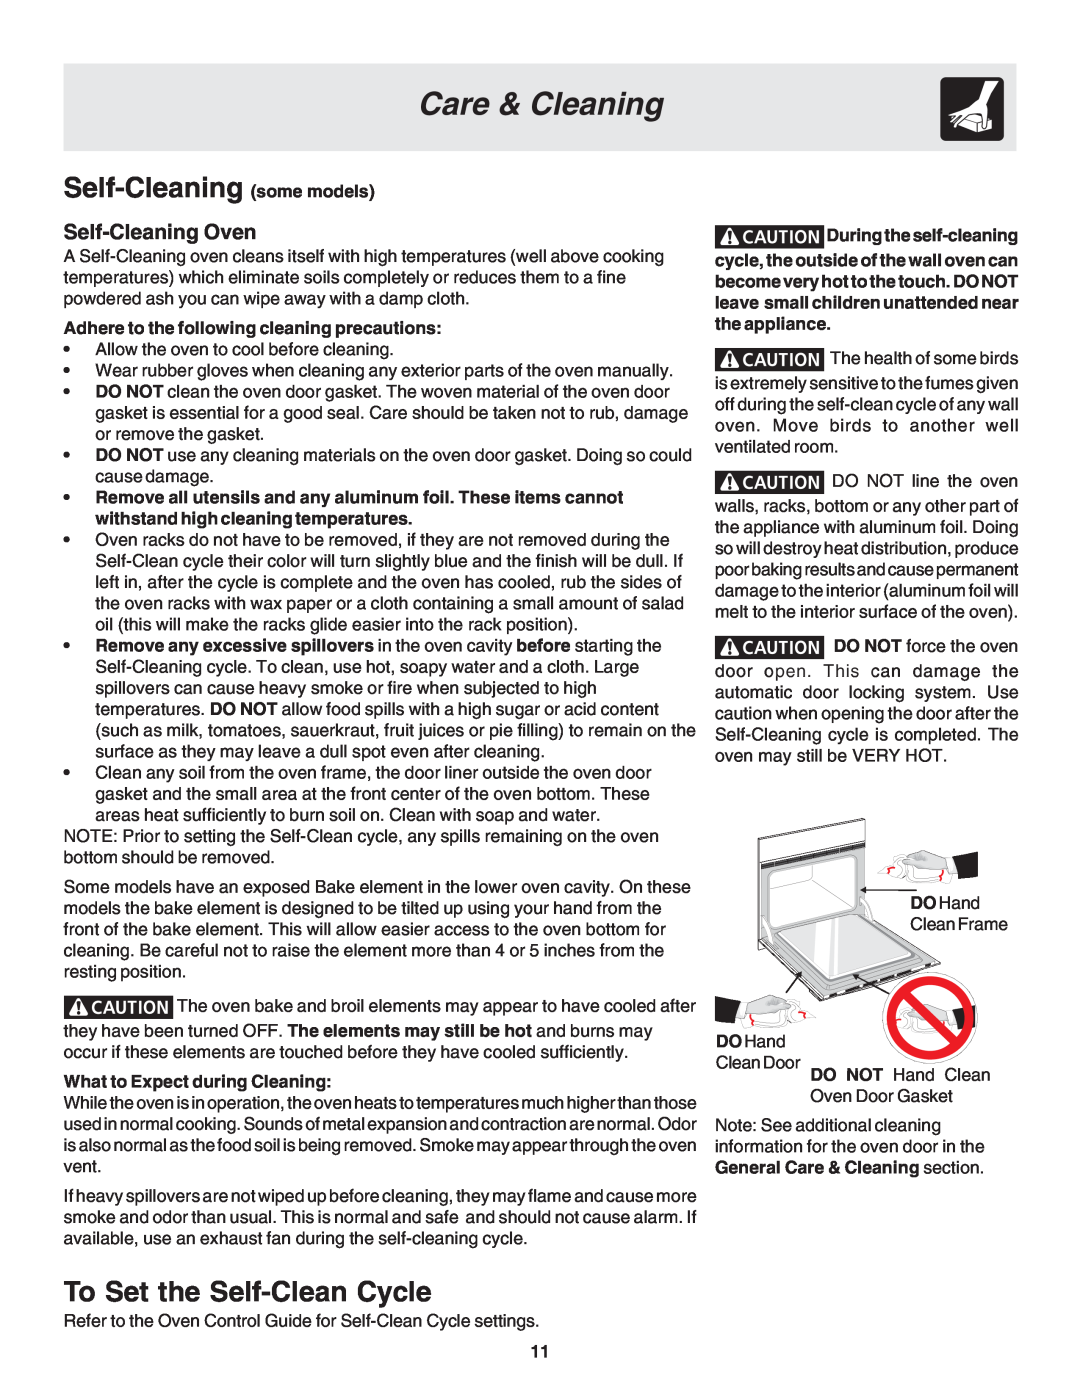 Frigidaire 318205116 warranty Self-Cleaning some models, To Set the Self-Clean Cycle, Self-Cleaning Oven, Care & Cleaning 